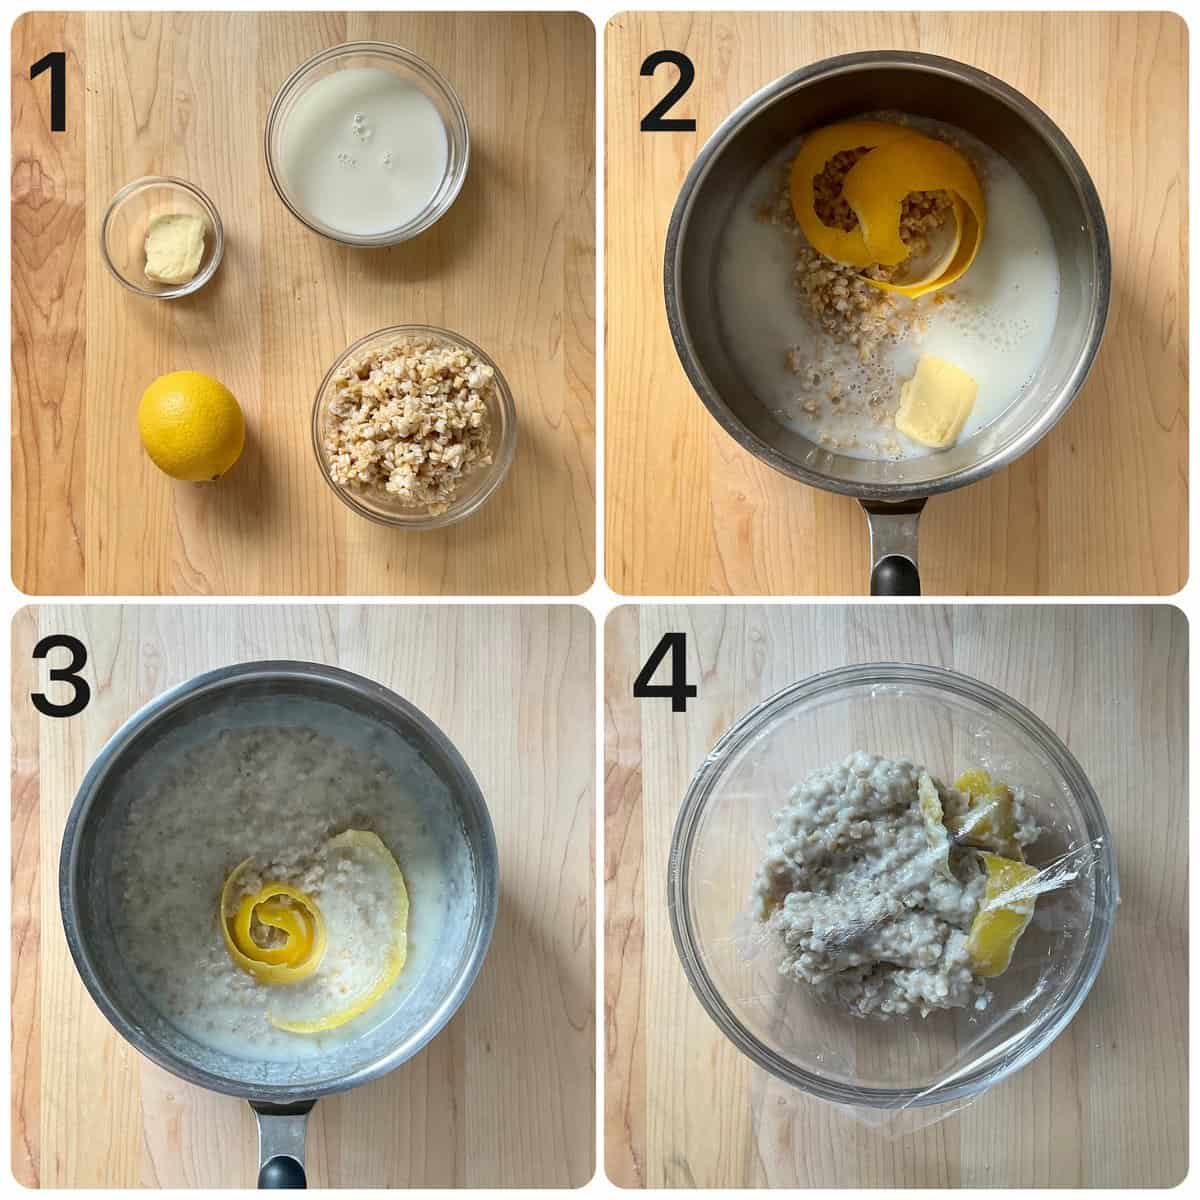 The step by step process to make the cooked wheat filling.